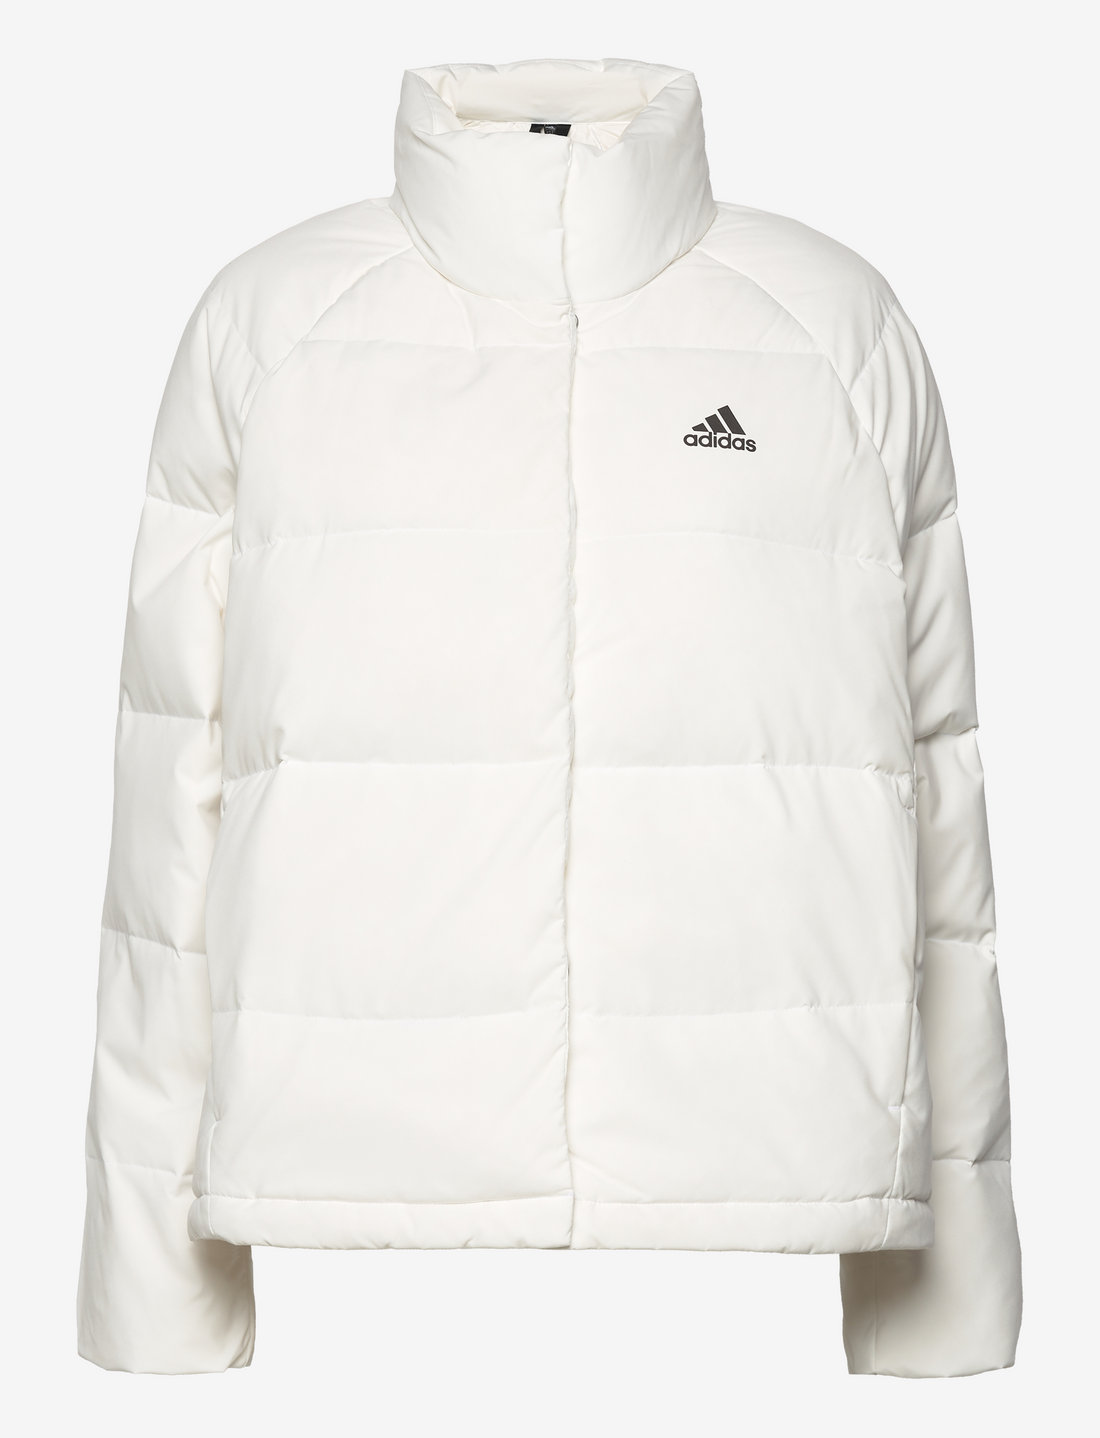 adidas Sportswear Helionic Relaxed Down Jacket - 170 €. Buy Down- & padded  jackets from adidas Sportswear online at Boozt.com. Fast delivery and easy  returns